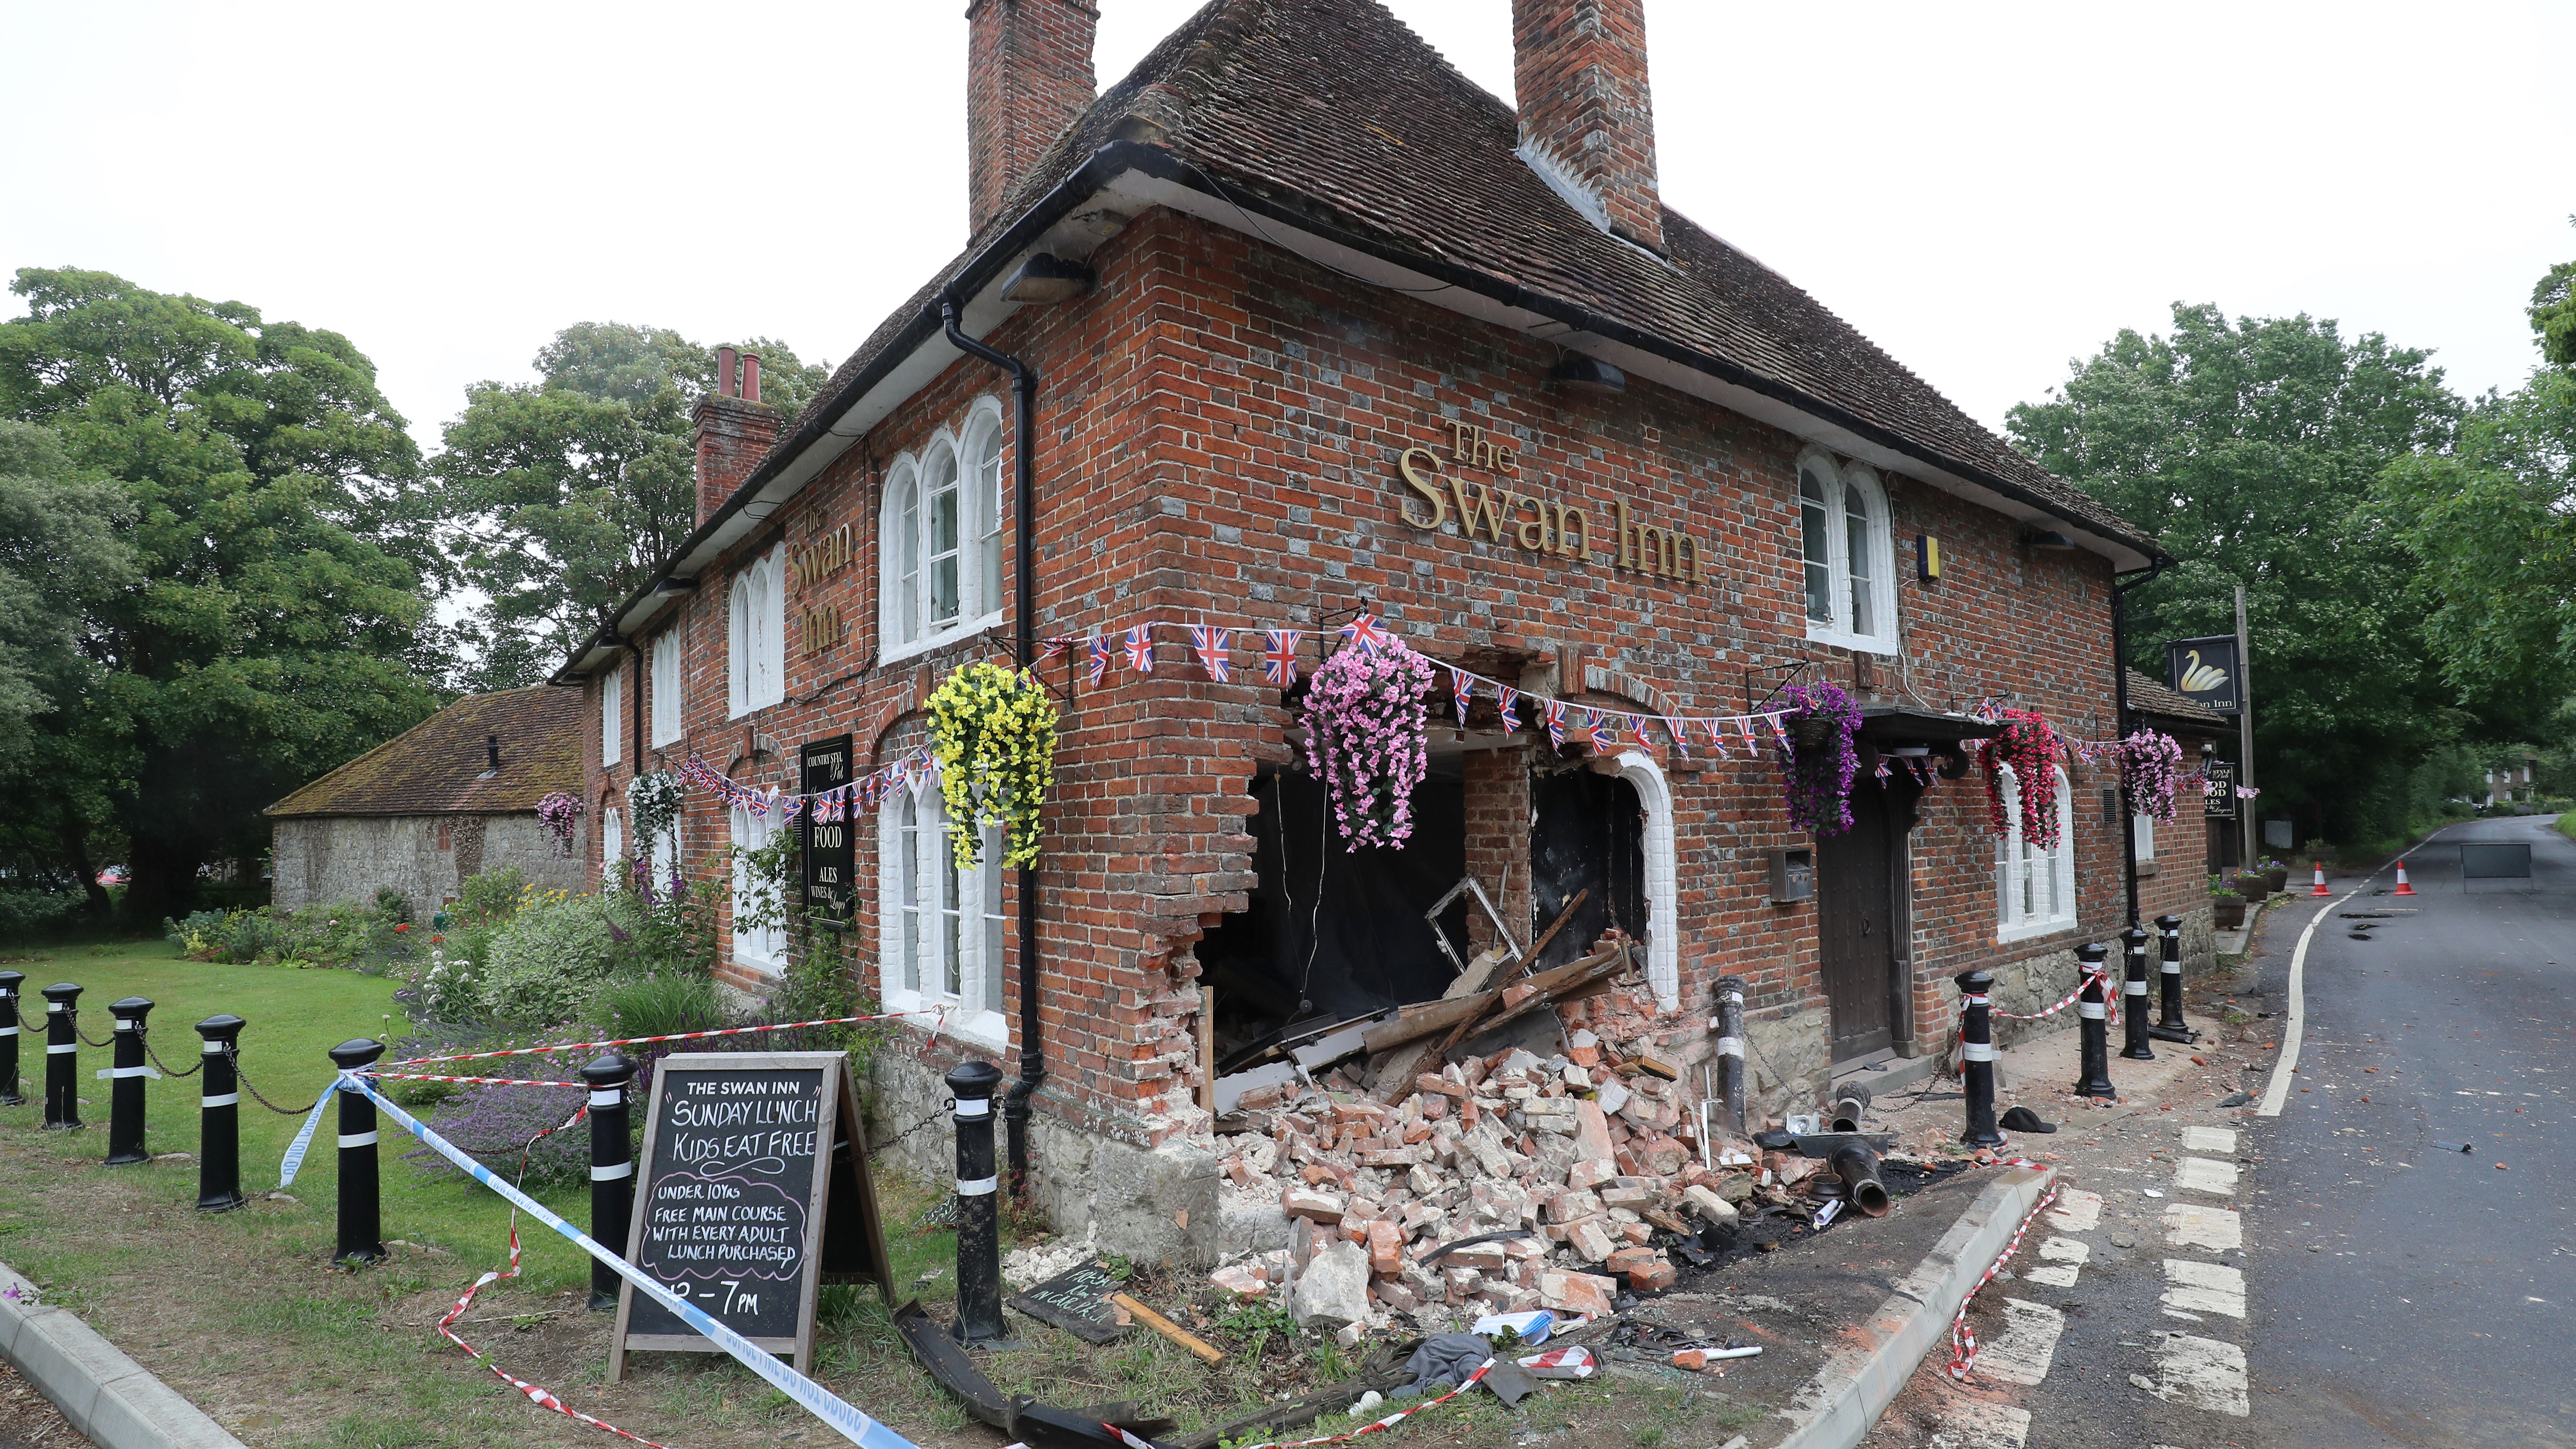 car-crashes-into-pub-in-kent-on-day-of-reopening-itv-news-meridian